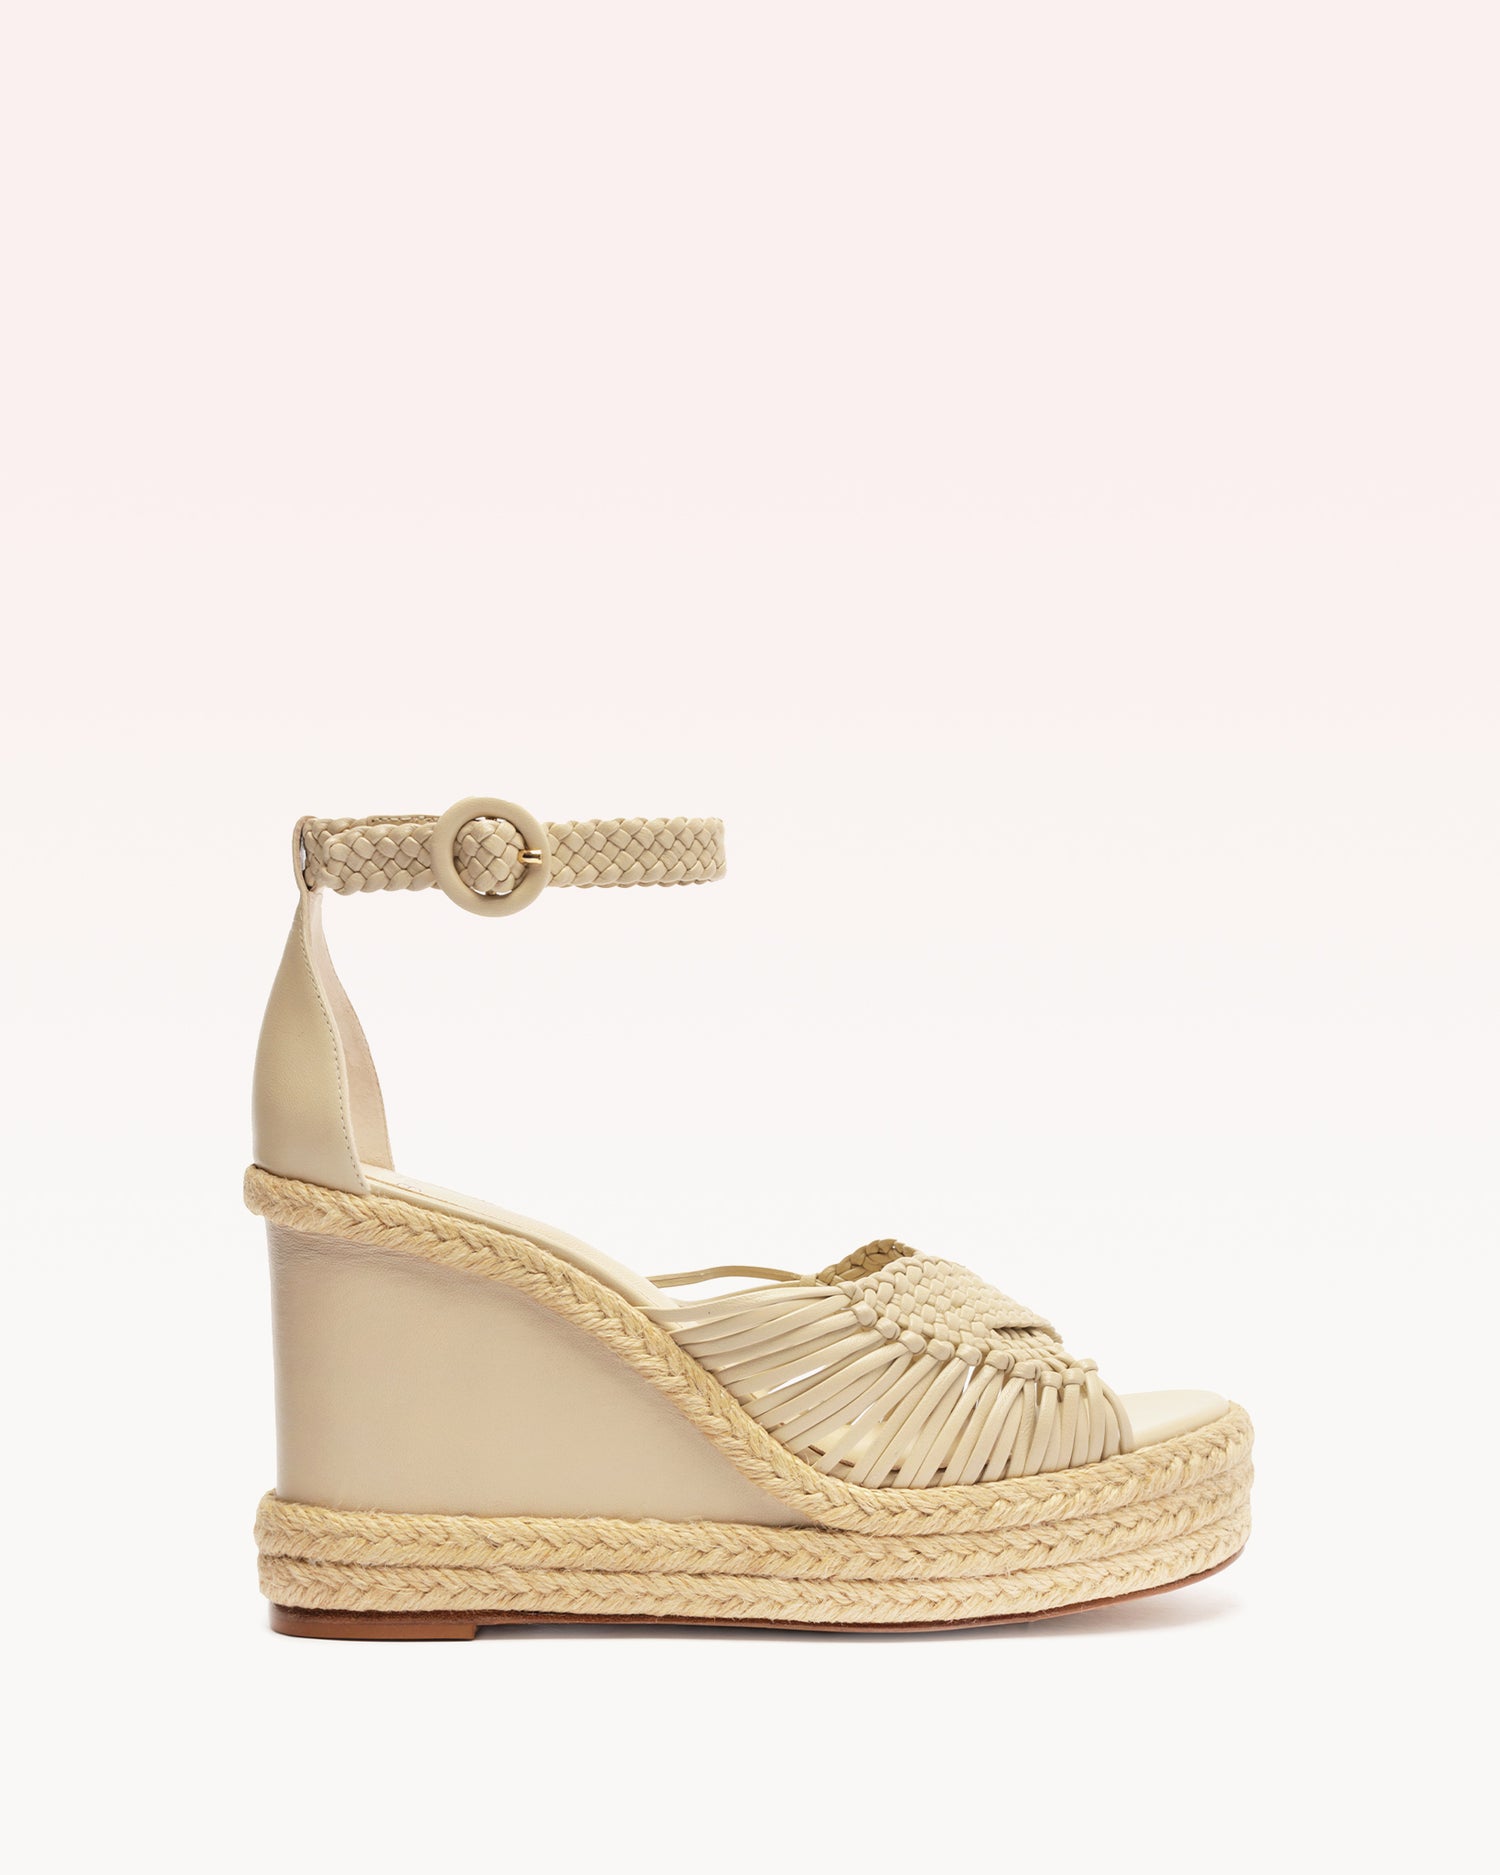 Ellie 100 Wedge Dove Wedges S/24 35 Dove Nappa Leather